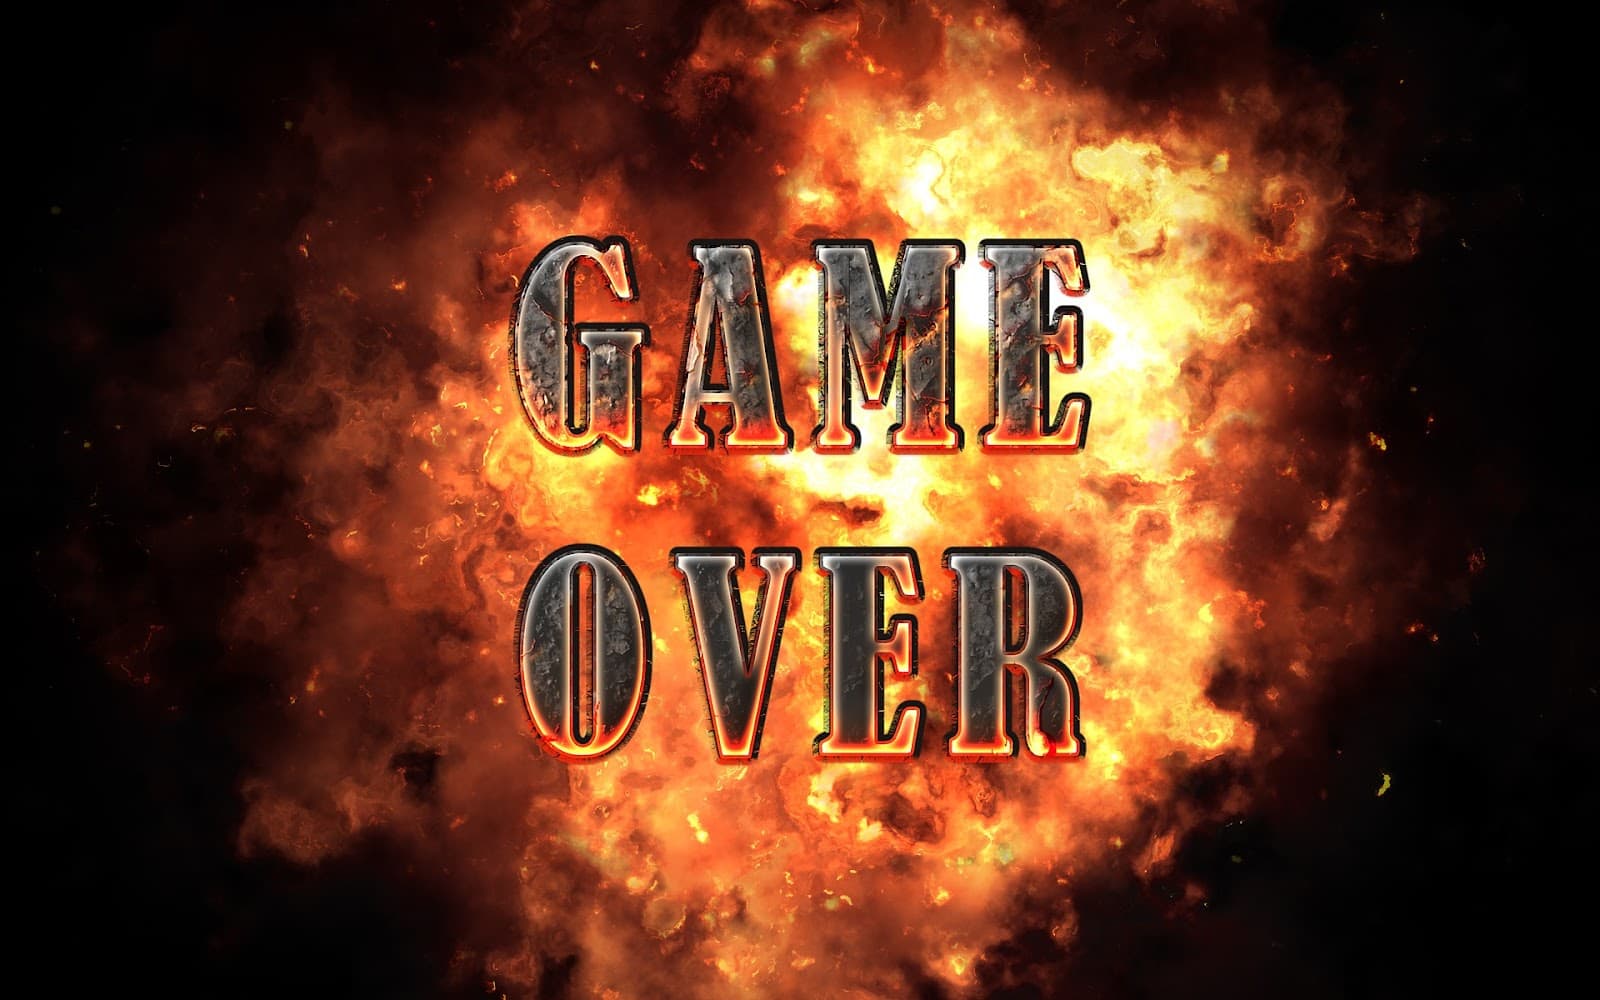 Game over image with fire background